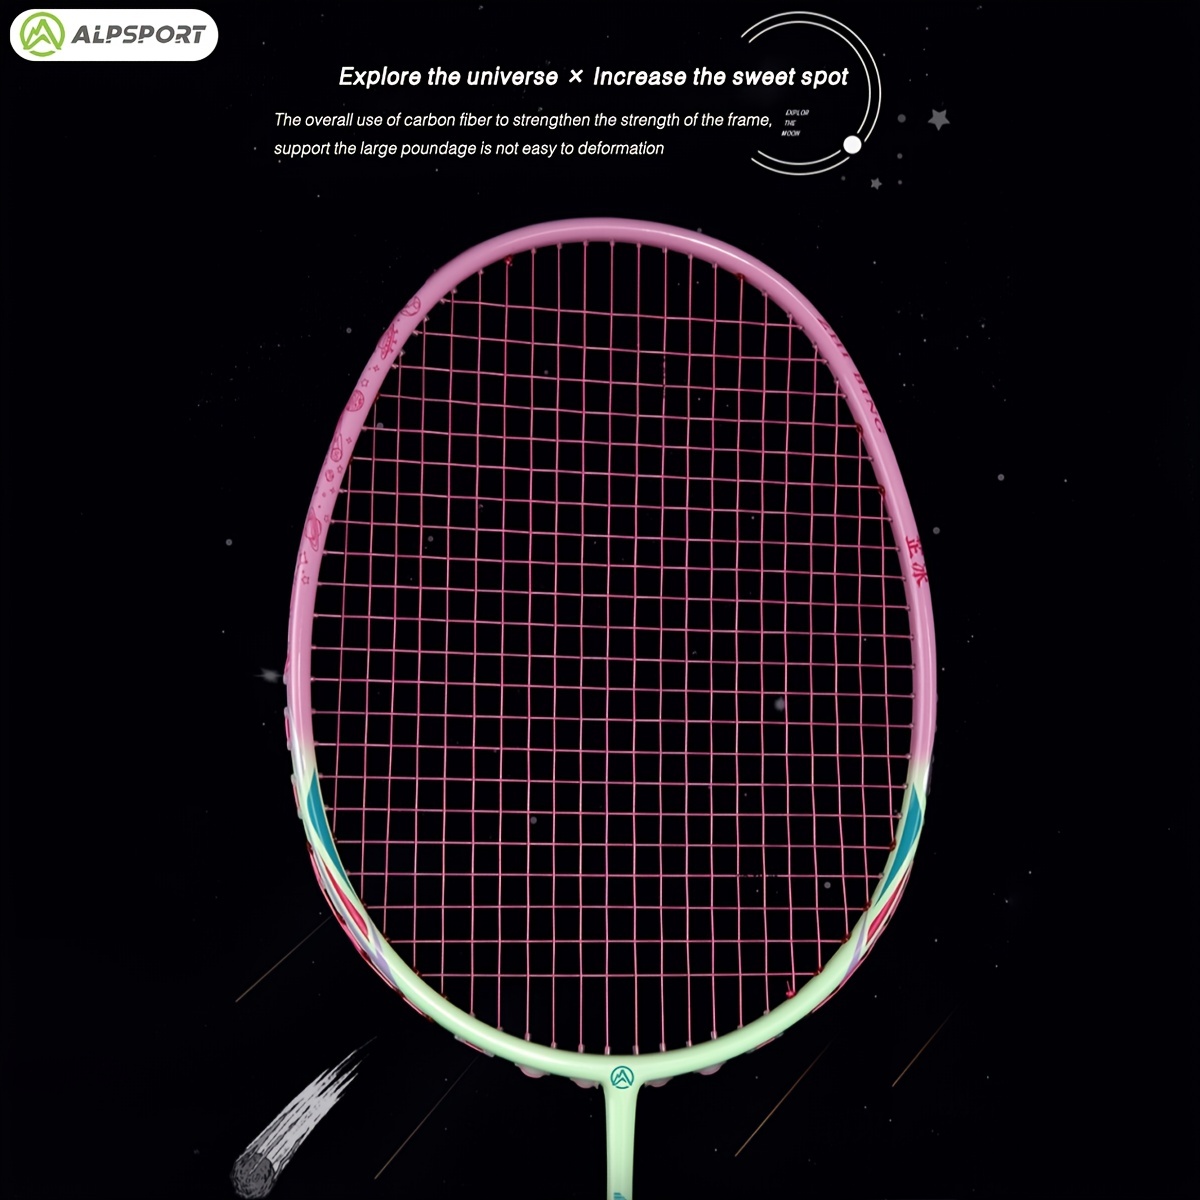 Male and Female Adult Super Light Carbon Professional Badminton